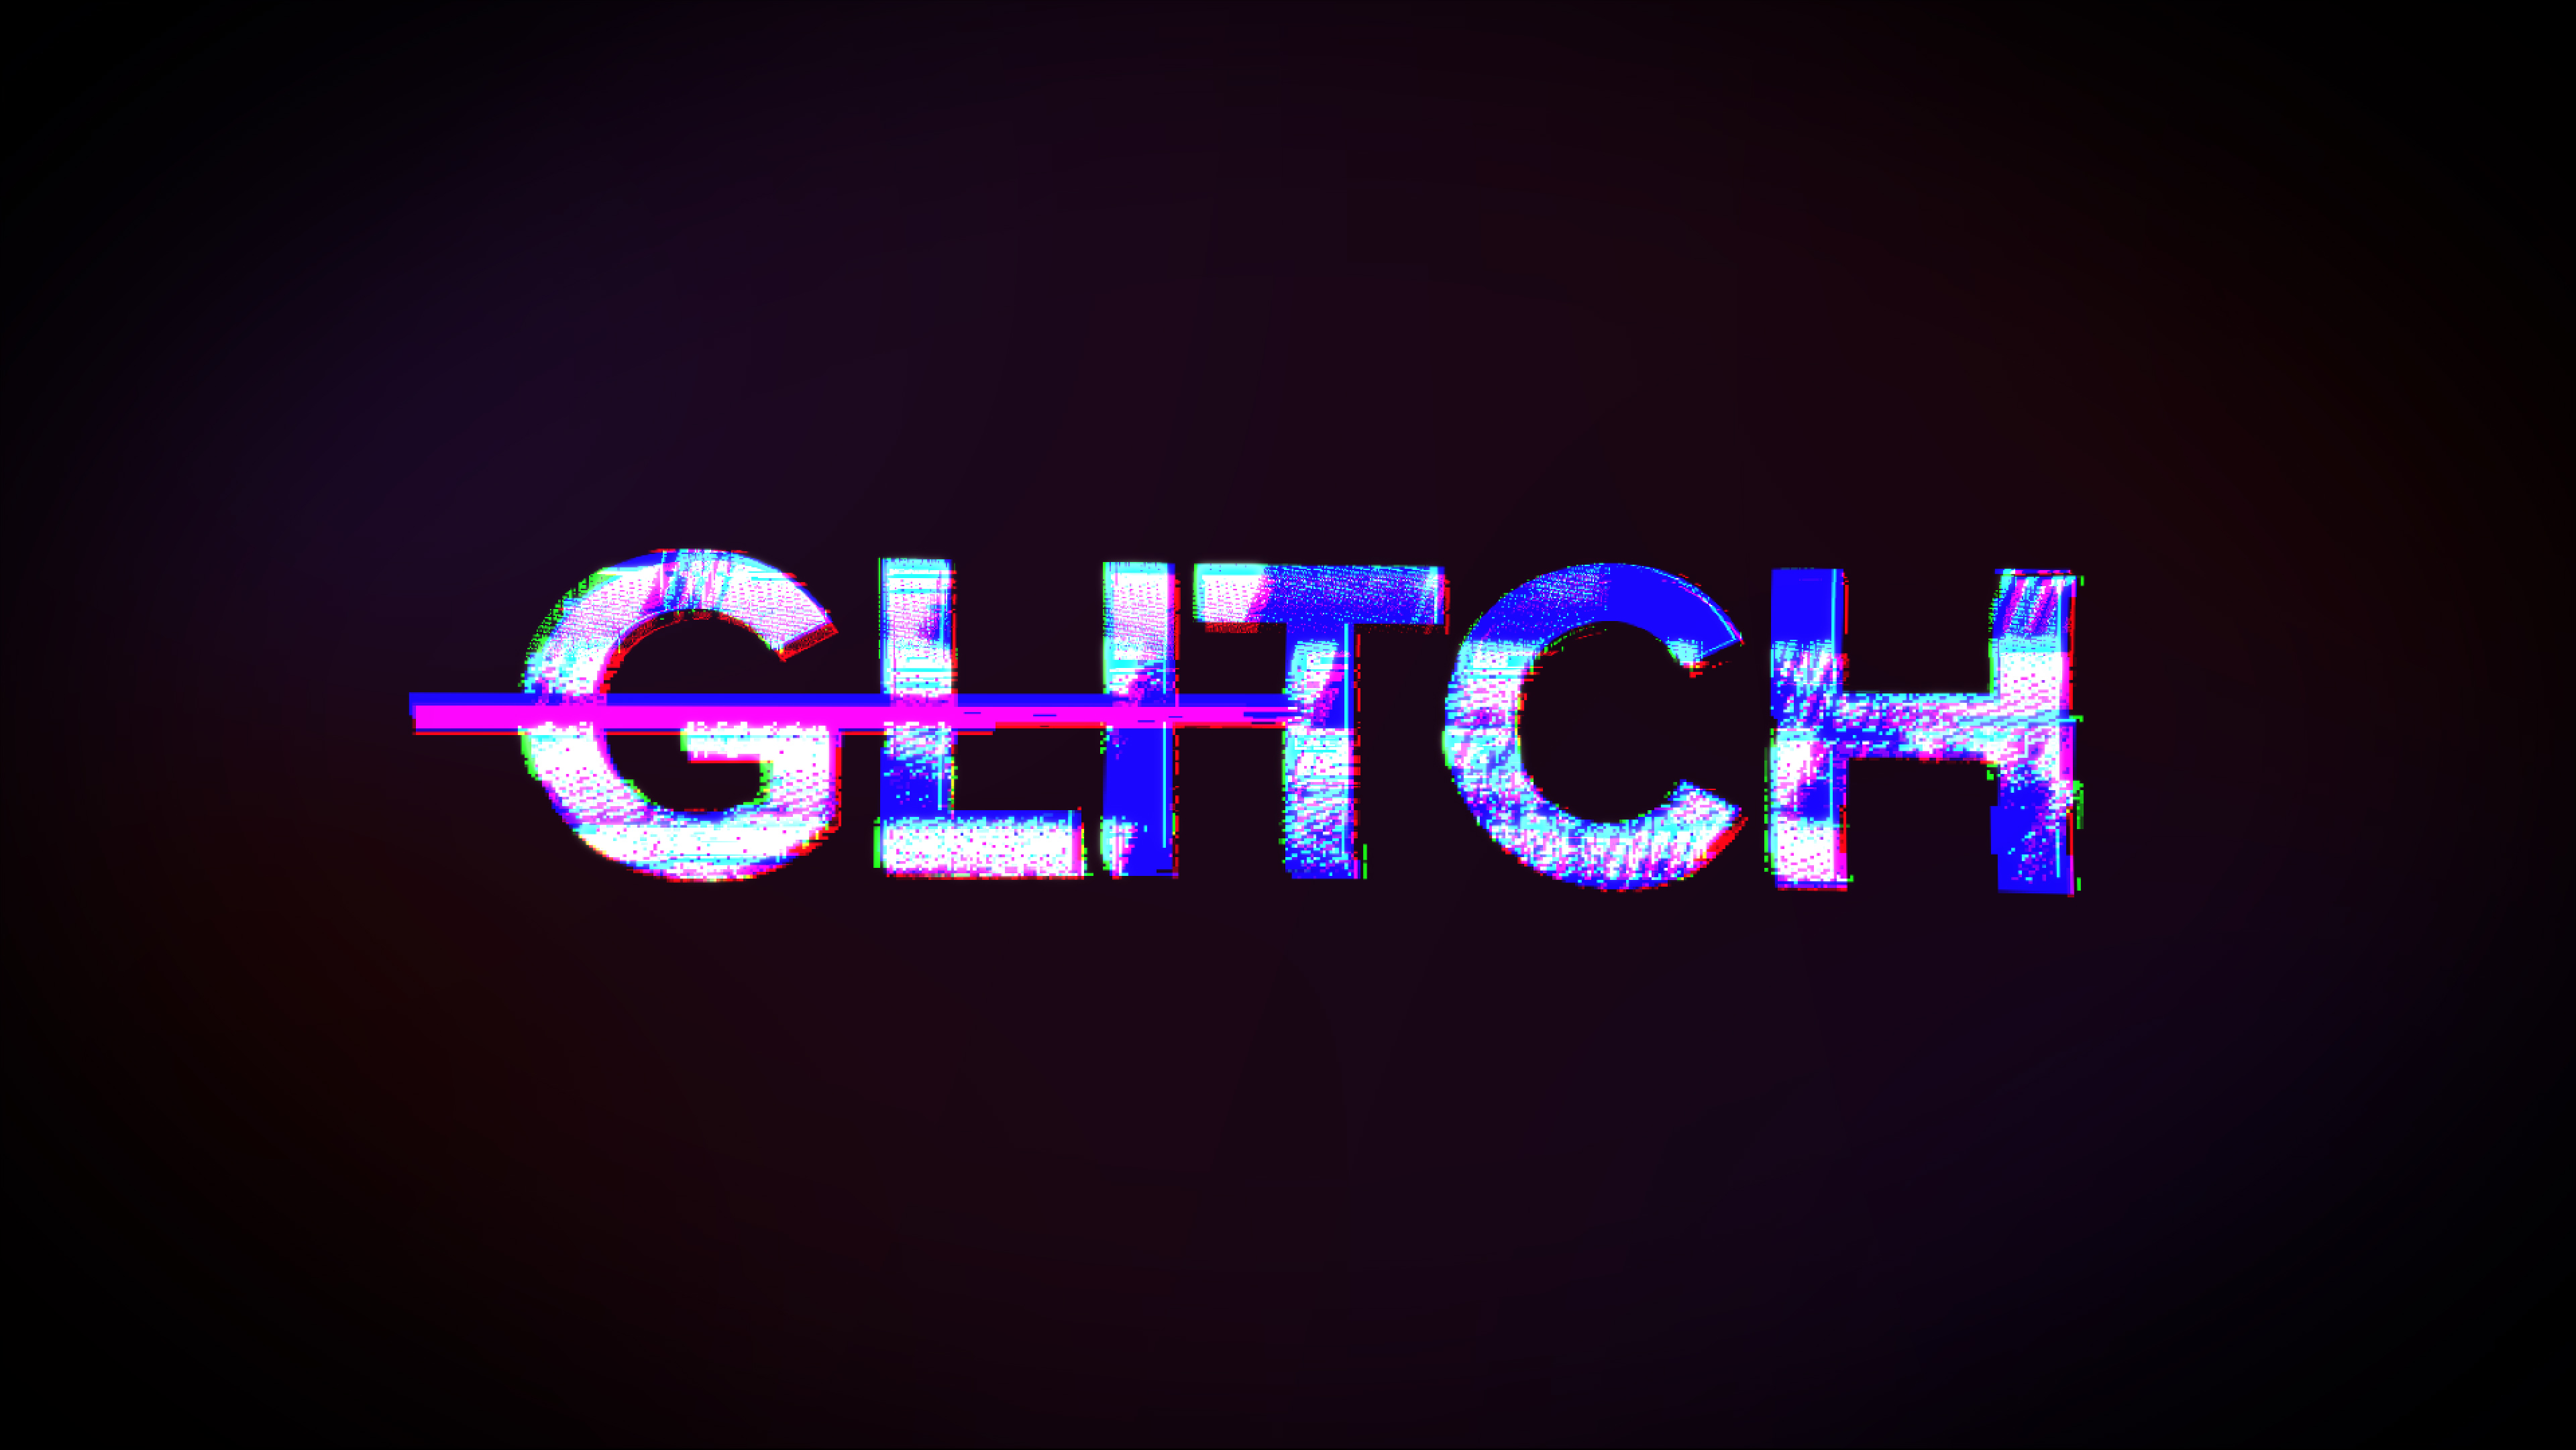 General 3840x2162 glitch art digital art abstract simple background text